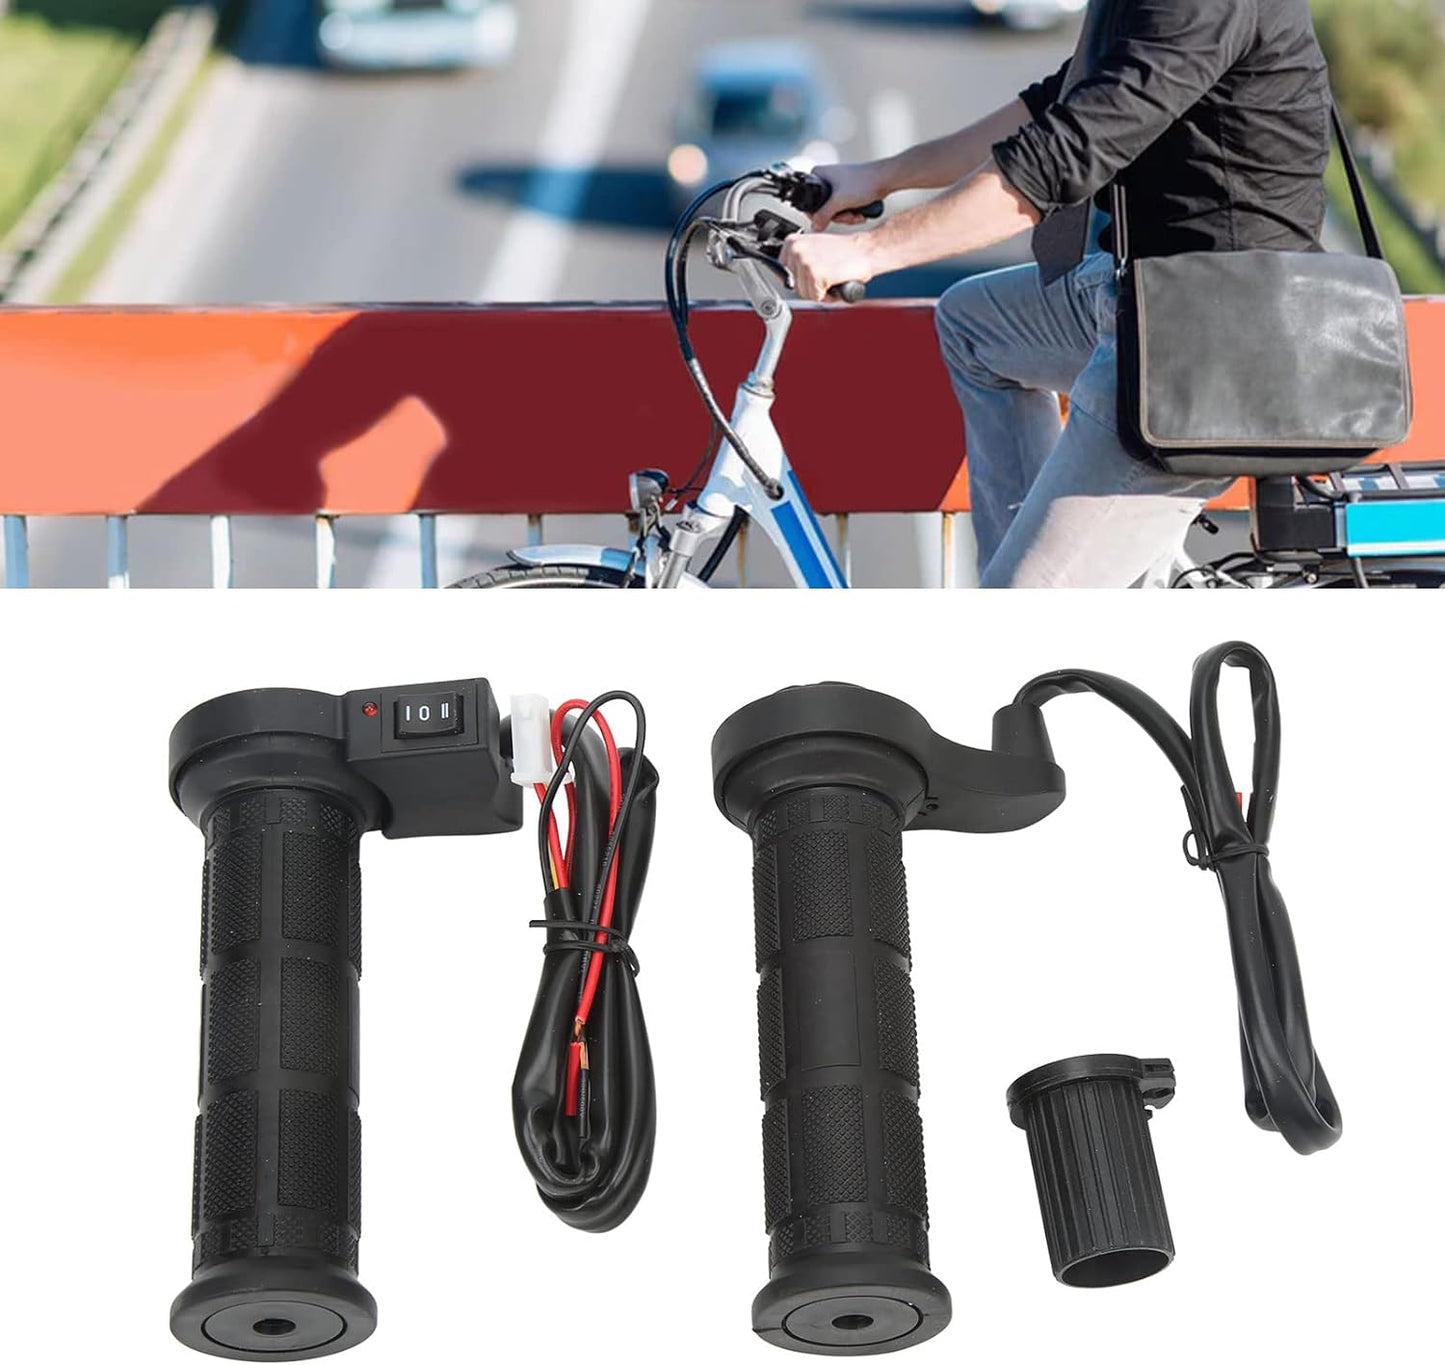 Qiilu Heated Motorcycle Grip Kit 22mm 7/8 inches Universal Electric Hot Thermal Grip Warm Hand Grips Hot Handlebar CO: 256